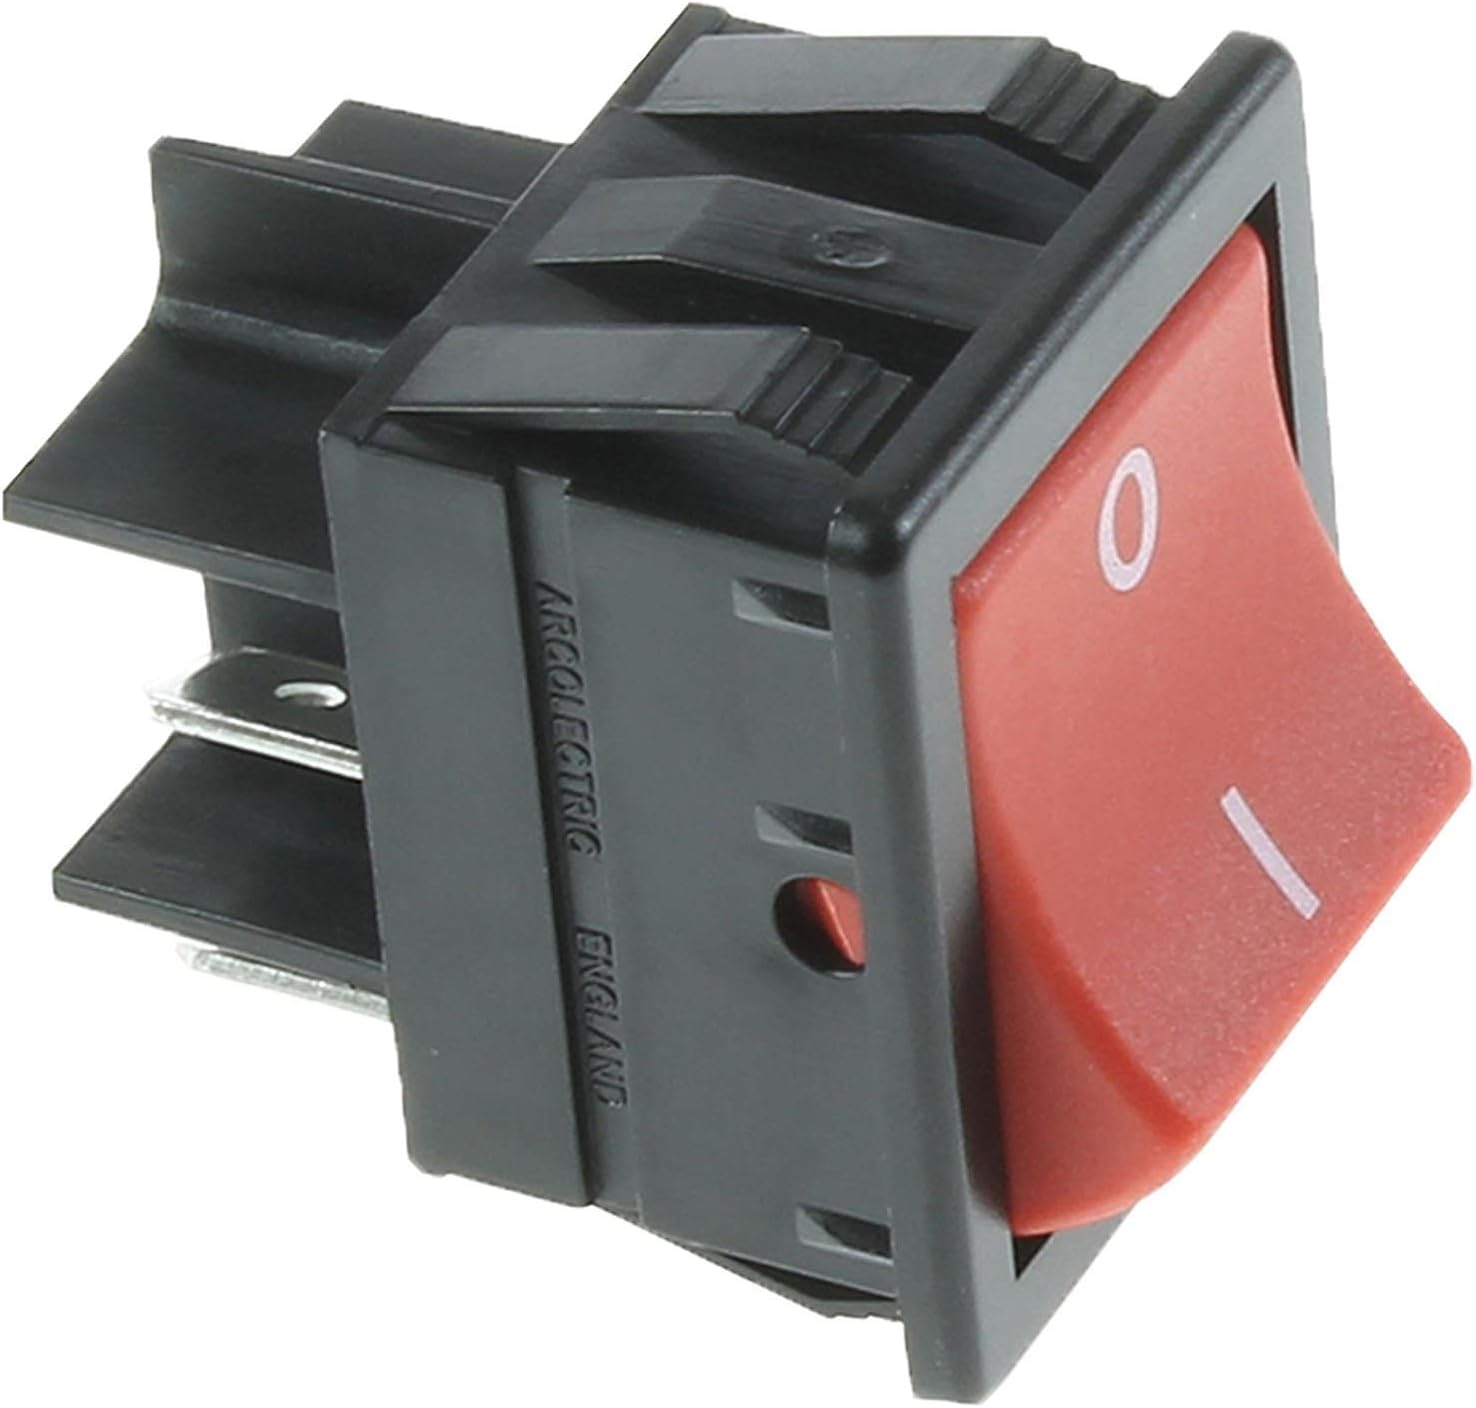 Replacement Premium Quality On/Off Rocker Style Power Switch for Henry, Hetty, George, Basil Vacuum Cleaners